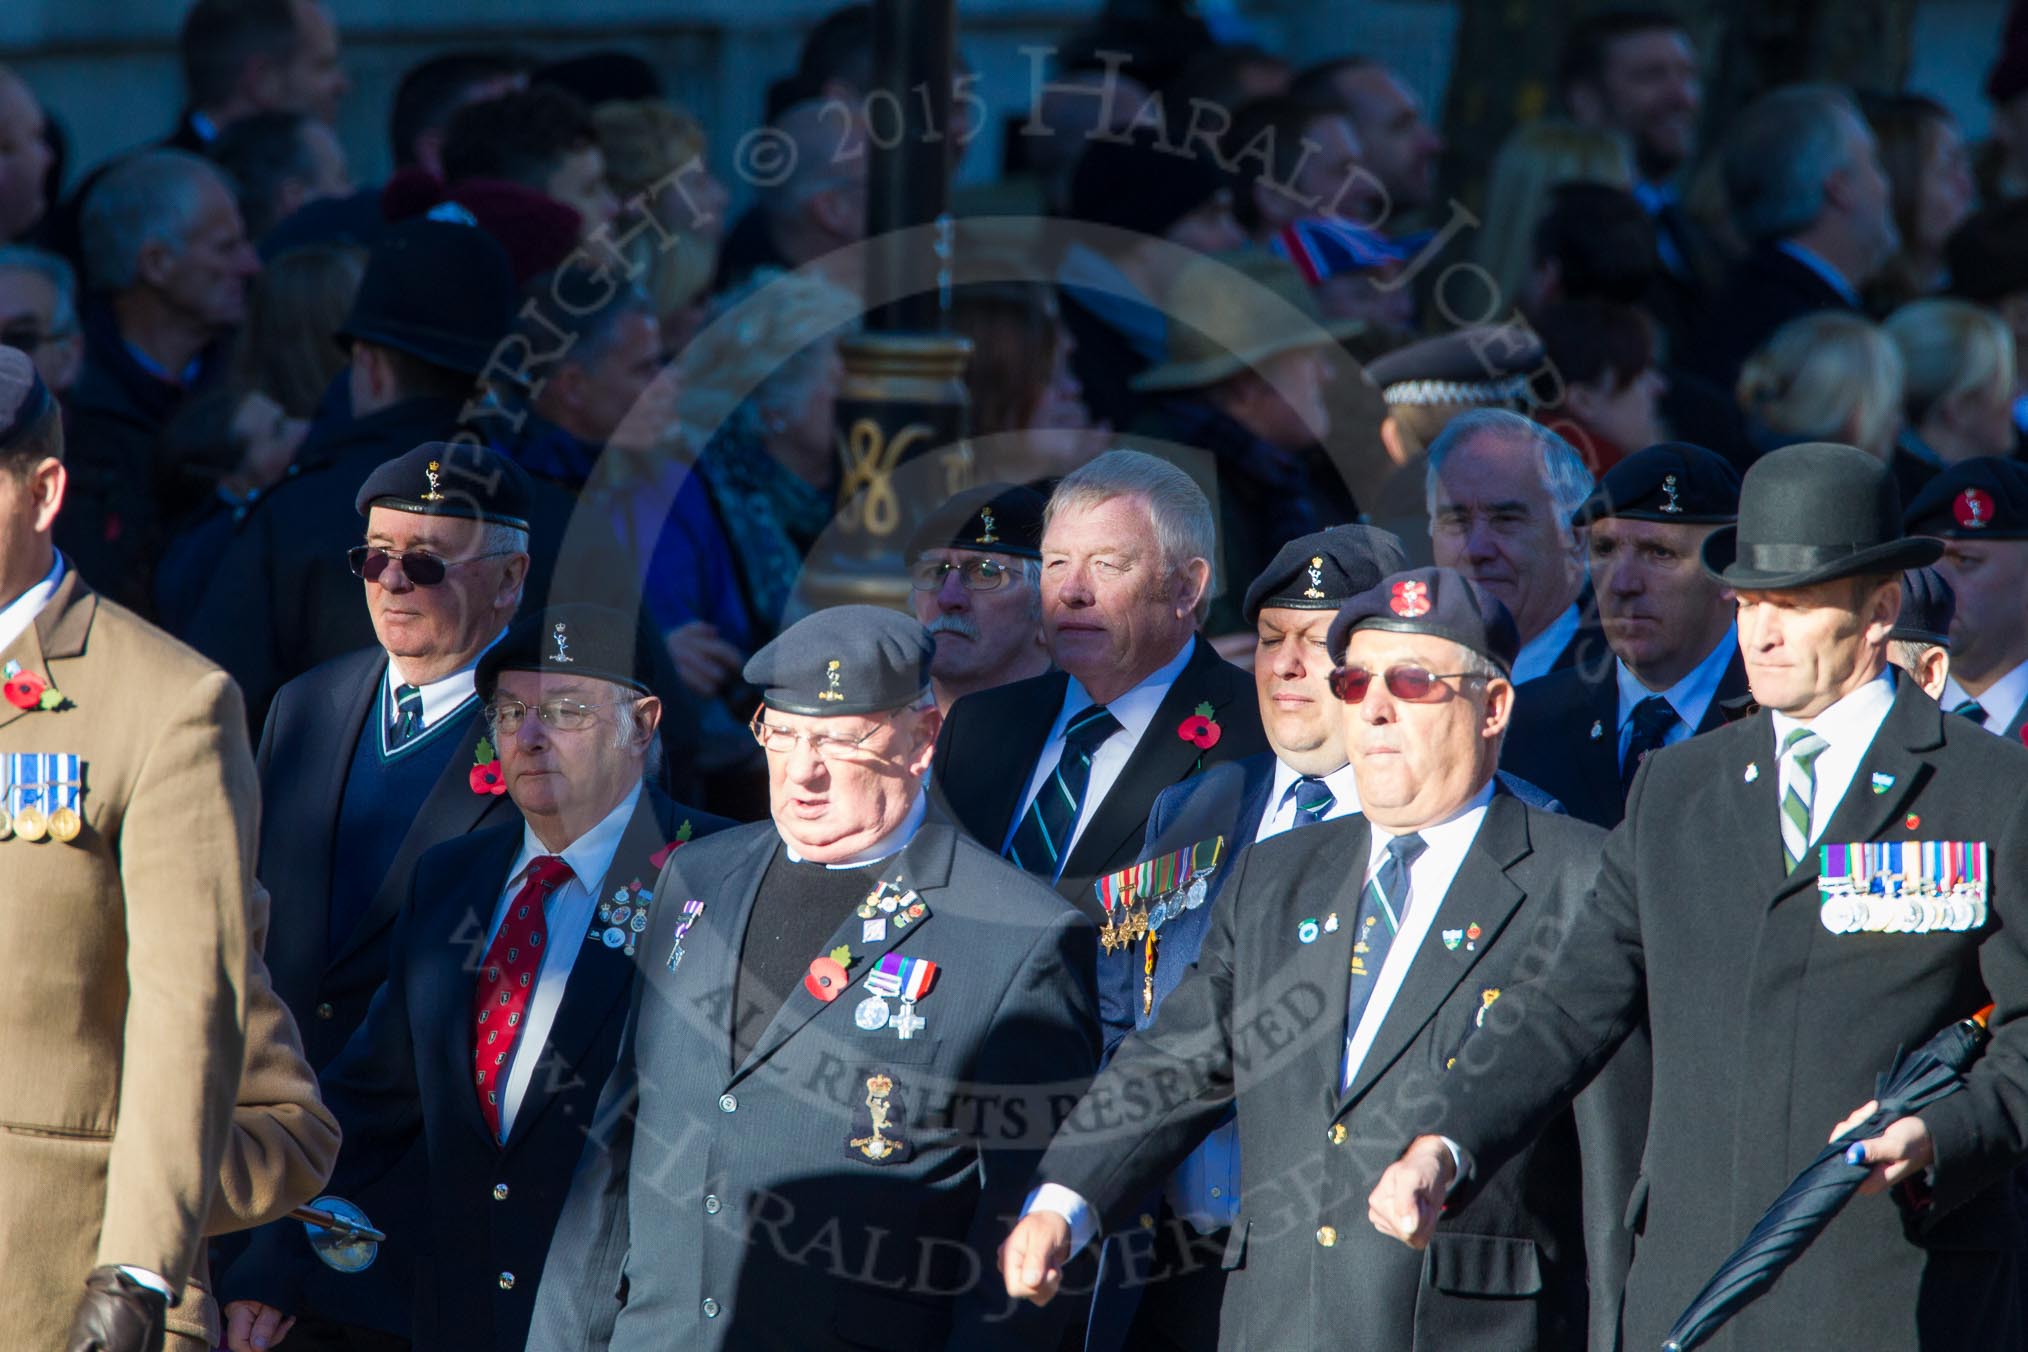 Remembrance Sunday Cenotaph March Past 2013: B23 - Mill Hill (Postal & Courier Services) Veterans' Association..
Press stand opposite the Foreign Office building, Whitehall, London SW1,
London,
Greater London,
United Kingdom,
on 10 November 2013 at 12:02, image #1501